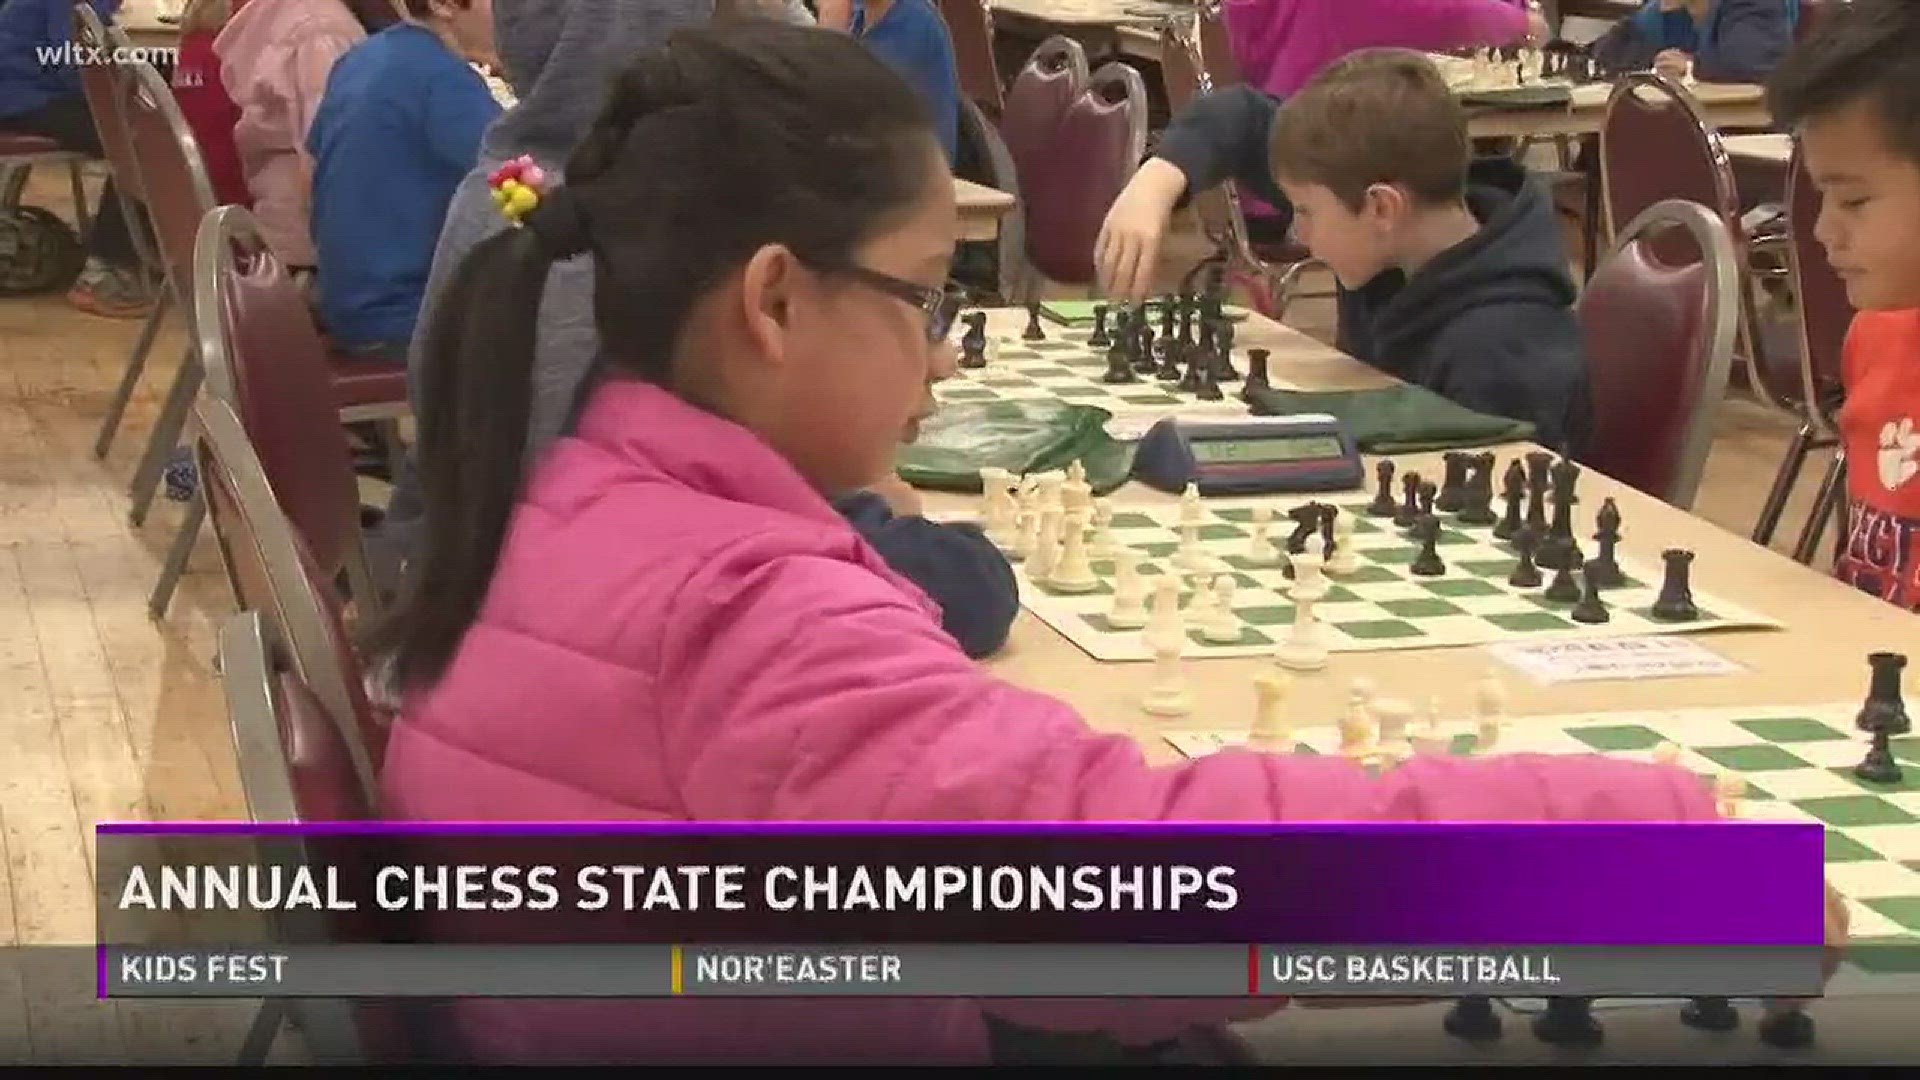 The State Museum was the site of the annual Chess State Championships on Saturday.